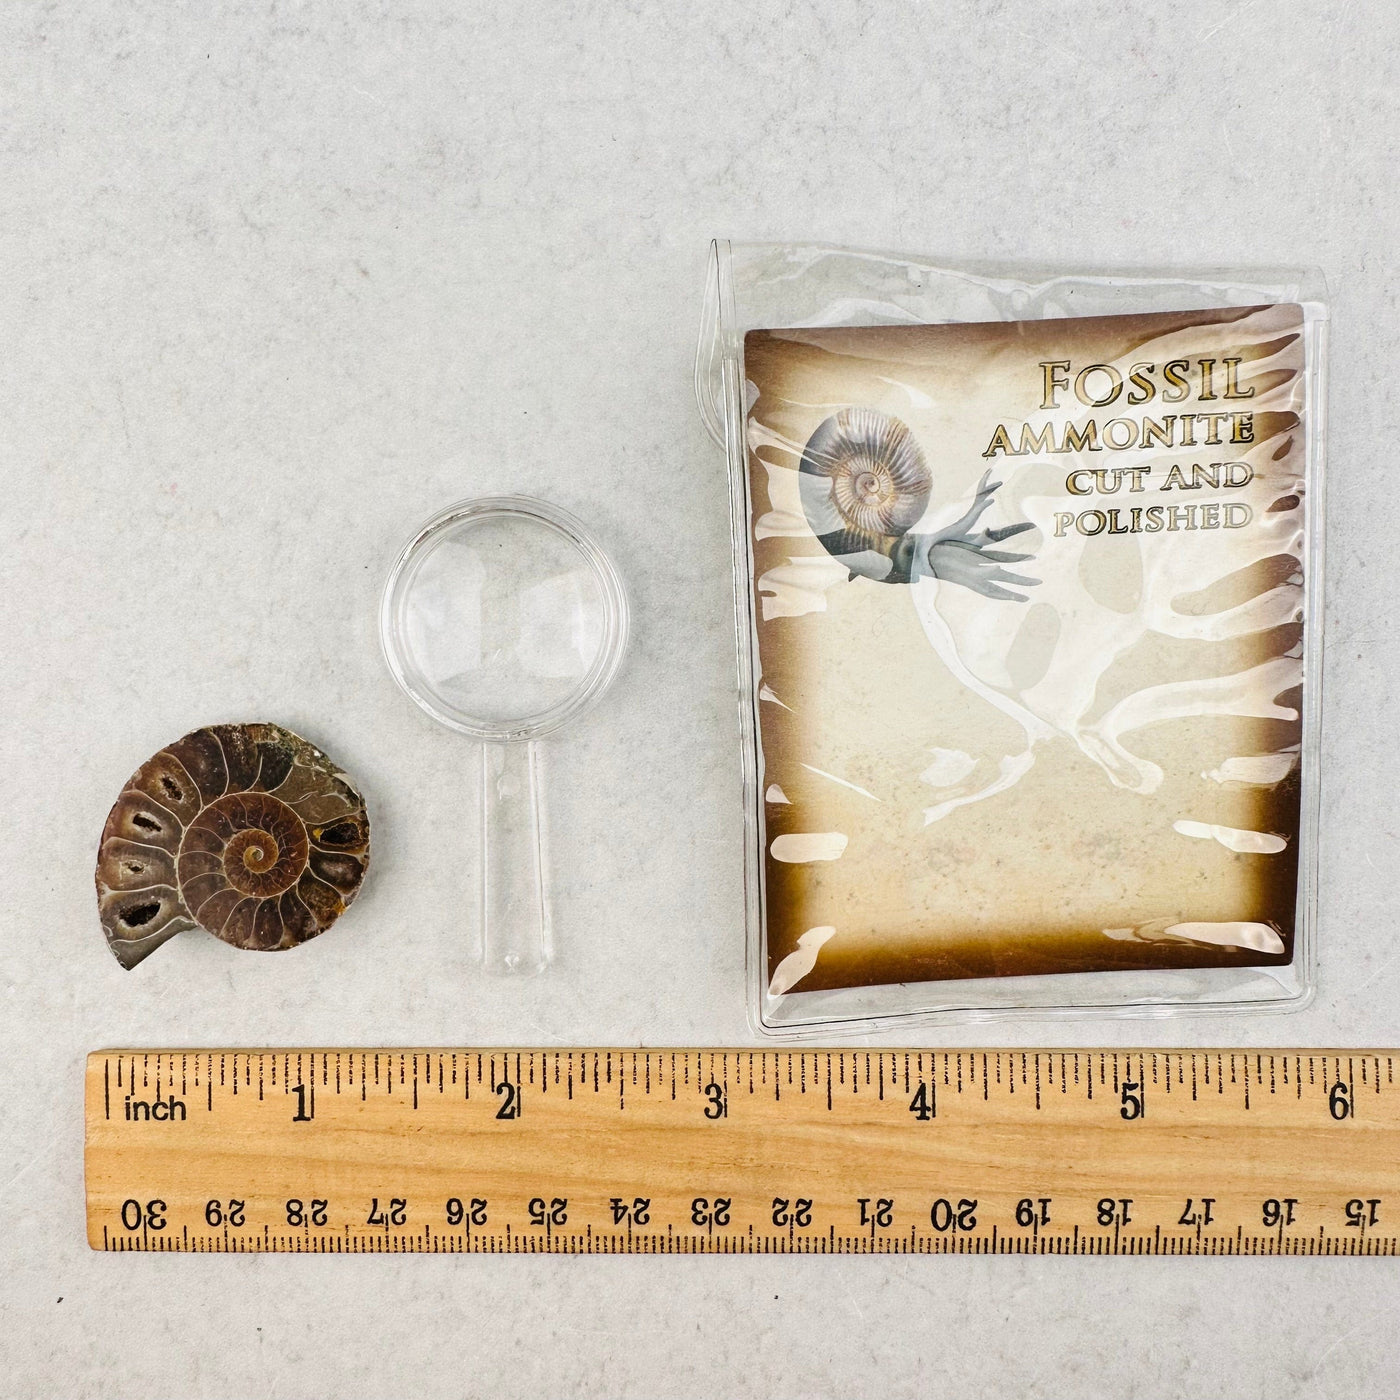 Cut and Polished Fossil with Magnify Glass next to a ruler for size reference 